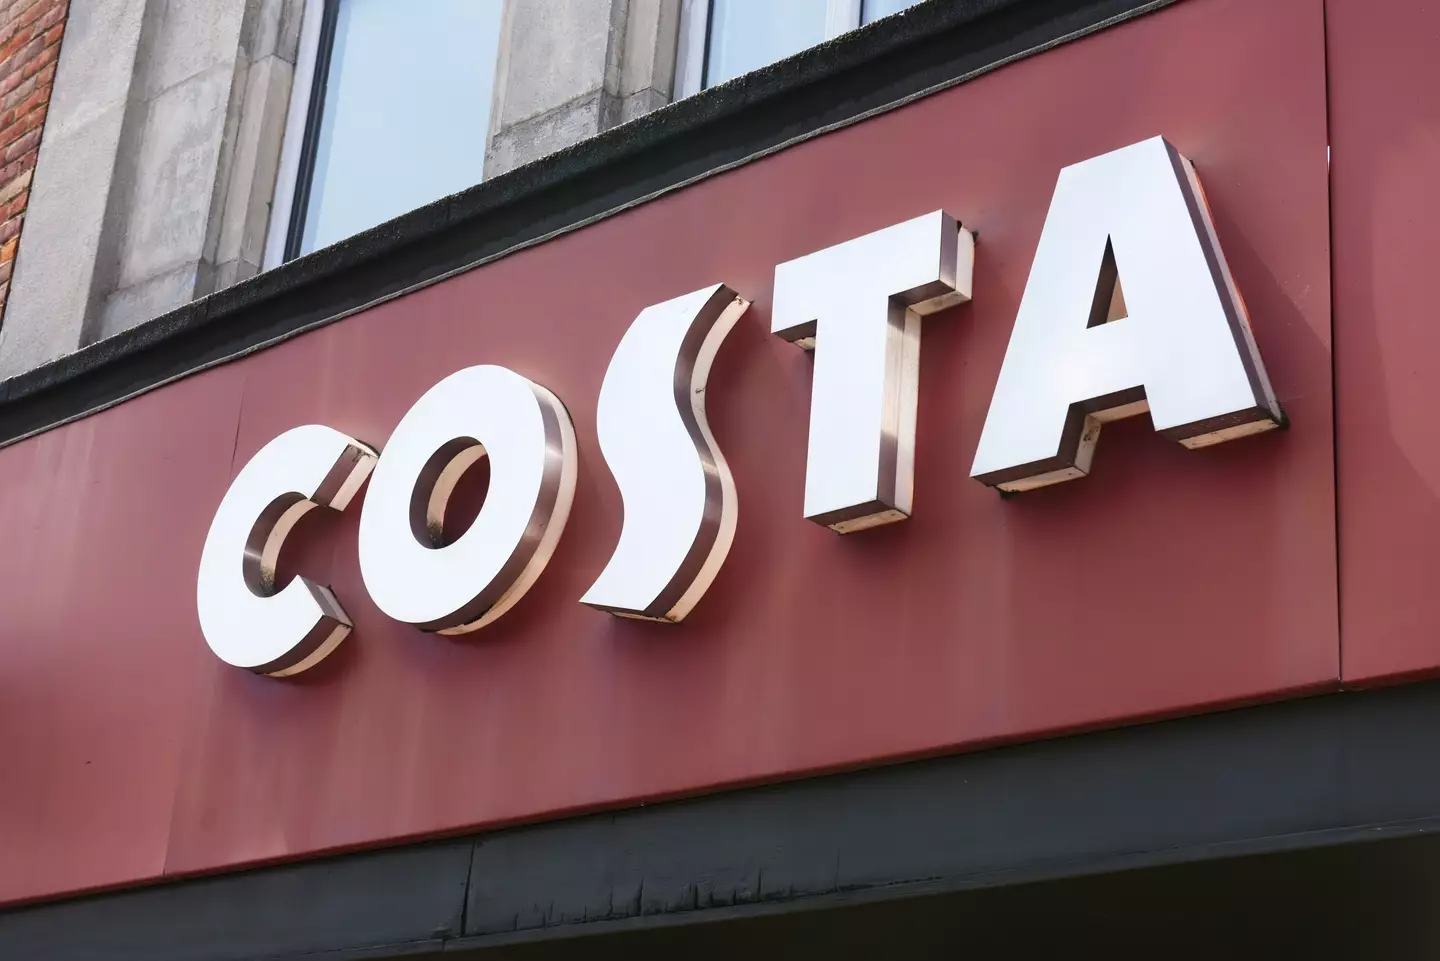 Costa is a popular choice for lunch and snacks.